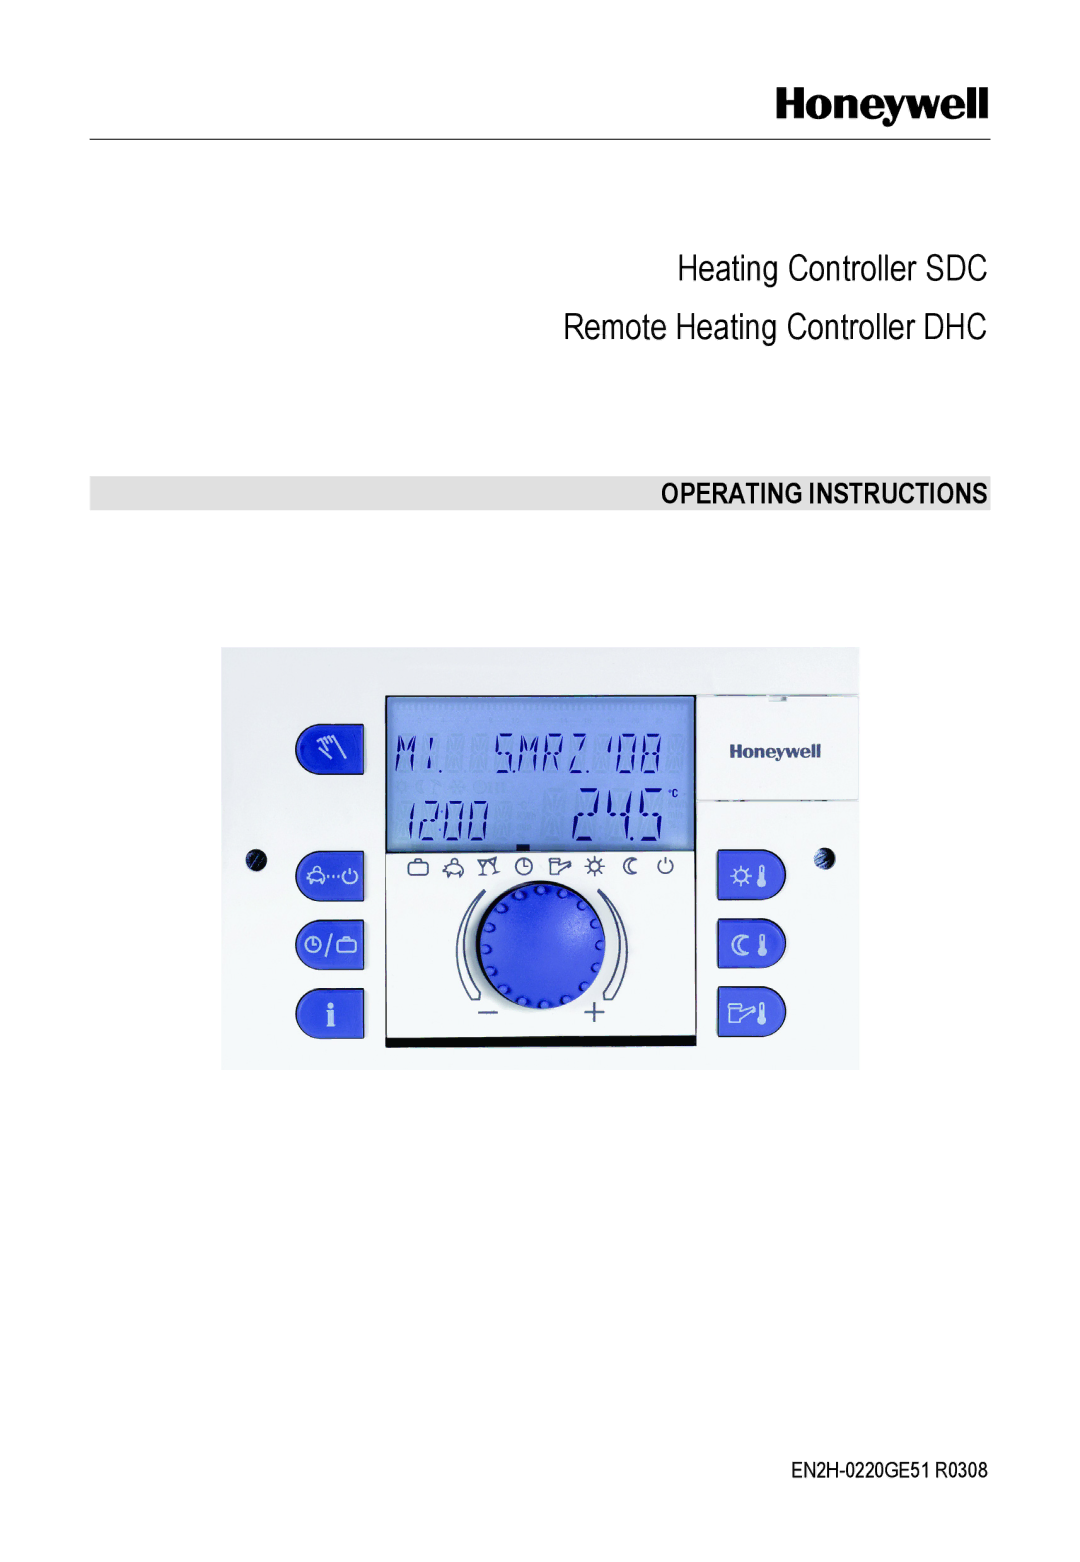 Honeywell manual Heating Controller SDC Remote Heating Controller DHC 